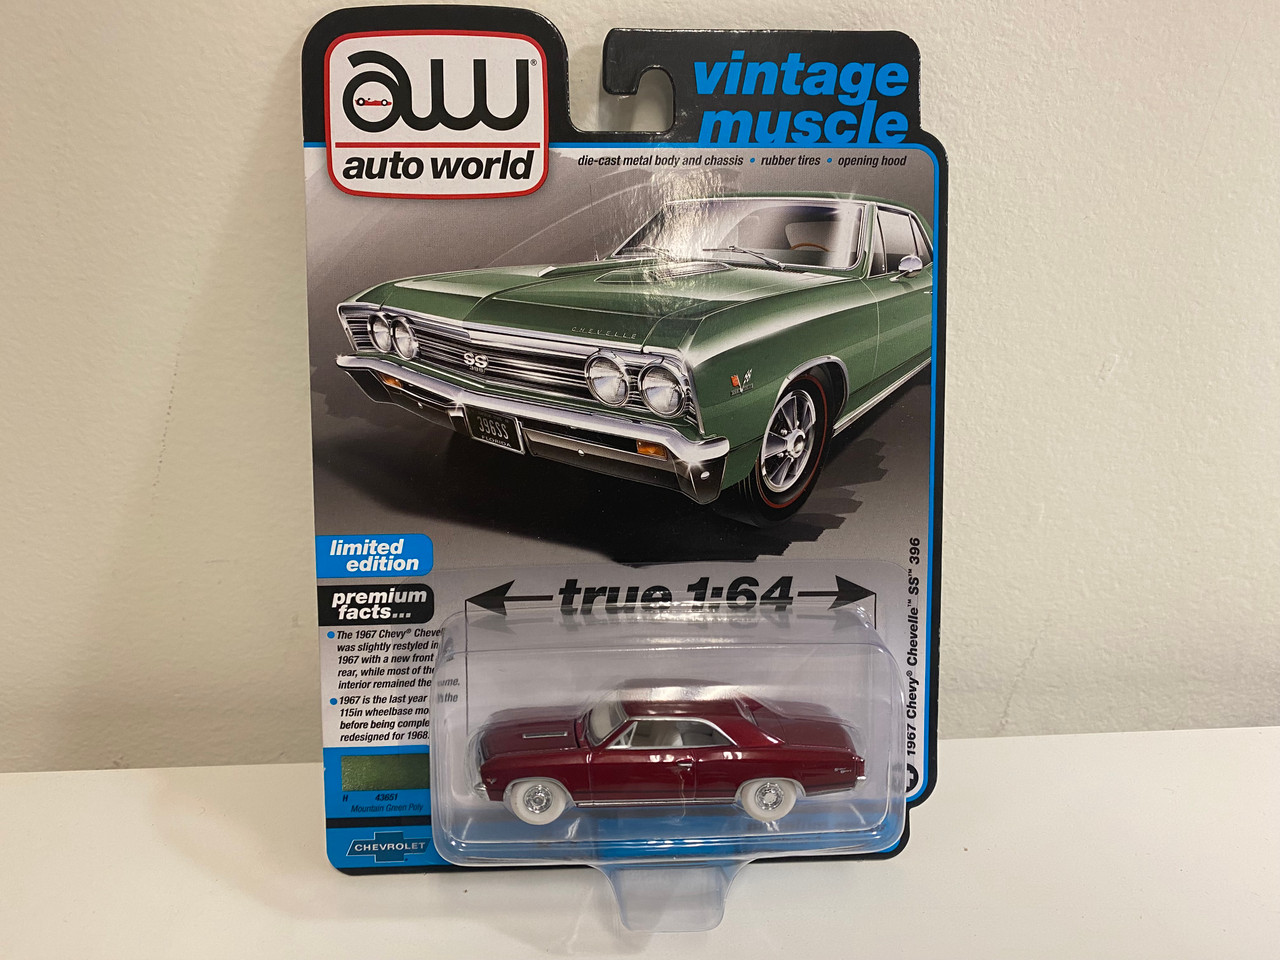 CHASE CAR 1/64 Auto World 1967 Chevrolet Chevelle SS 396 (Red with White Wheels) Diecast Car Model